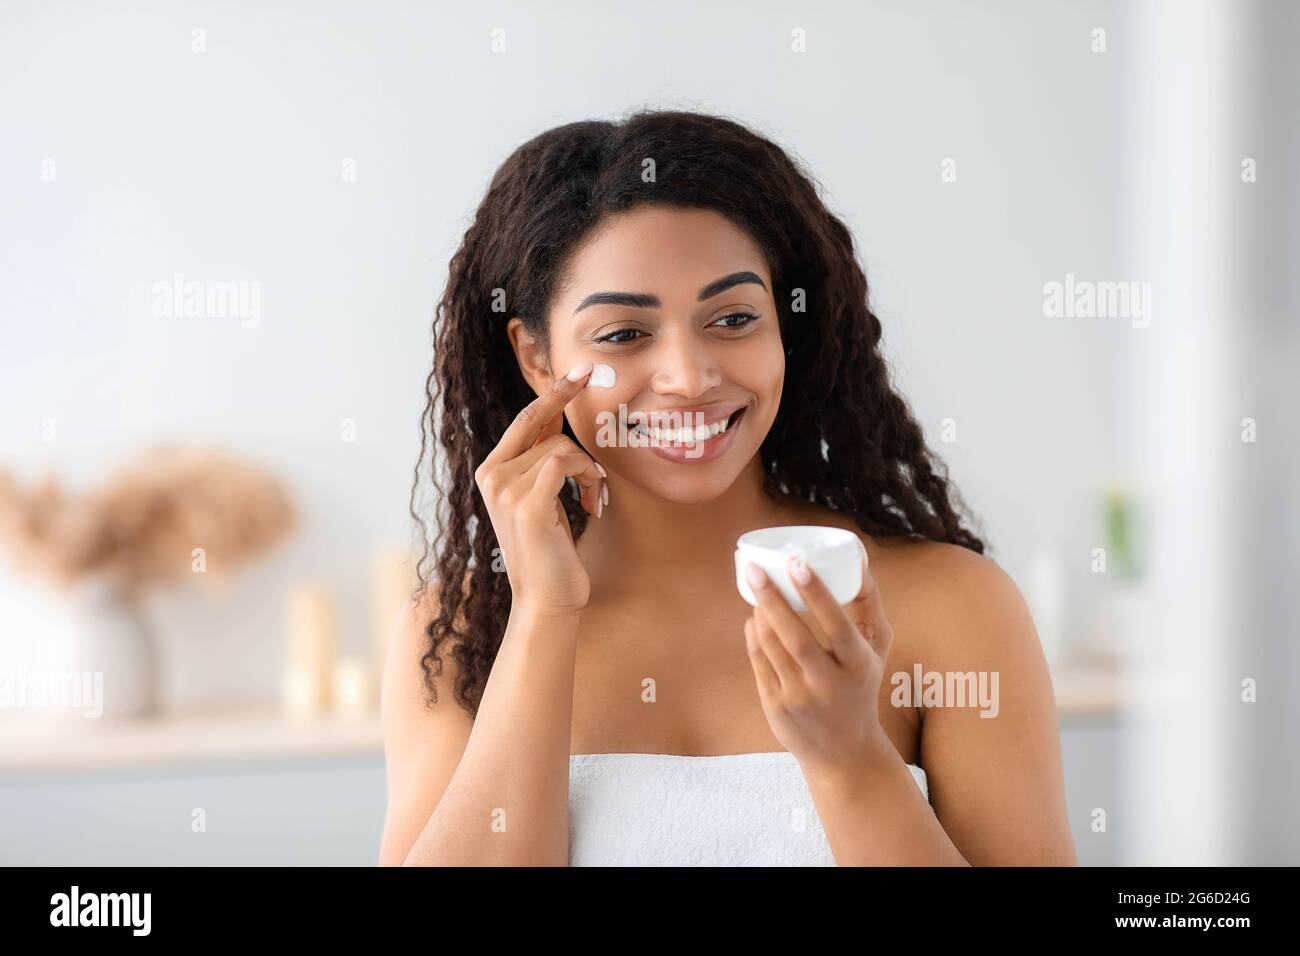 Covid-19 quarantine, perfect pure shining skin, anti-aging care, cosmetology at home Stock Photo